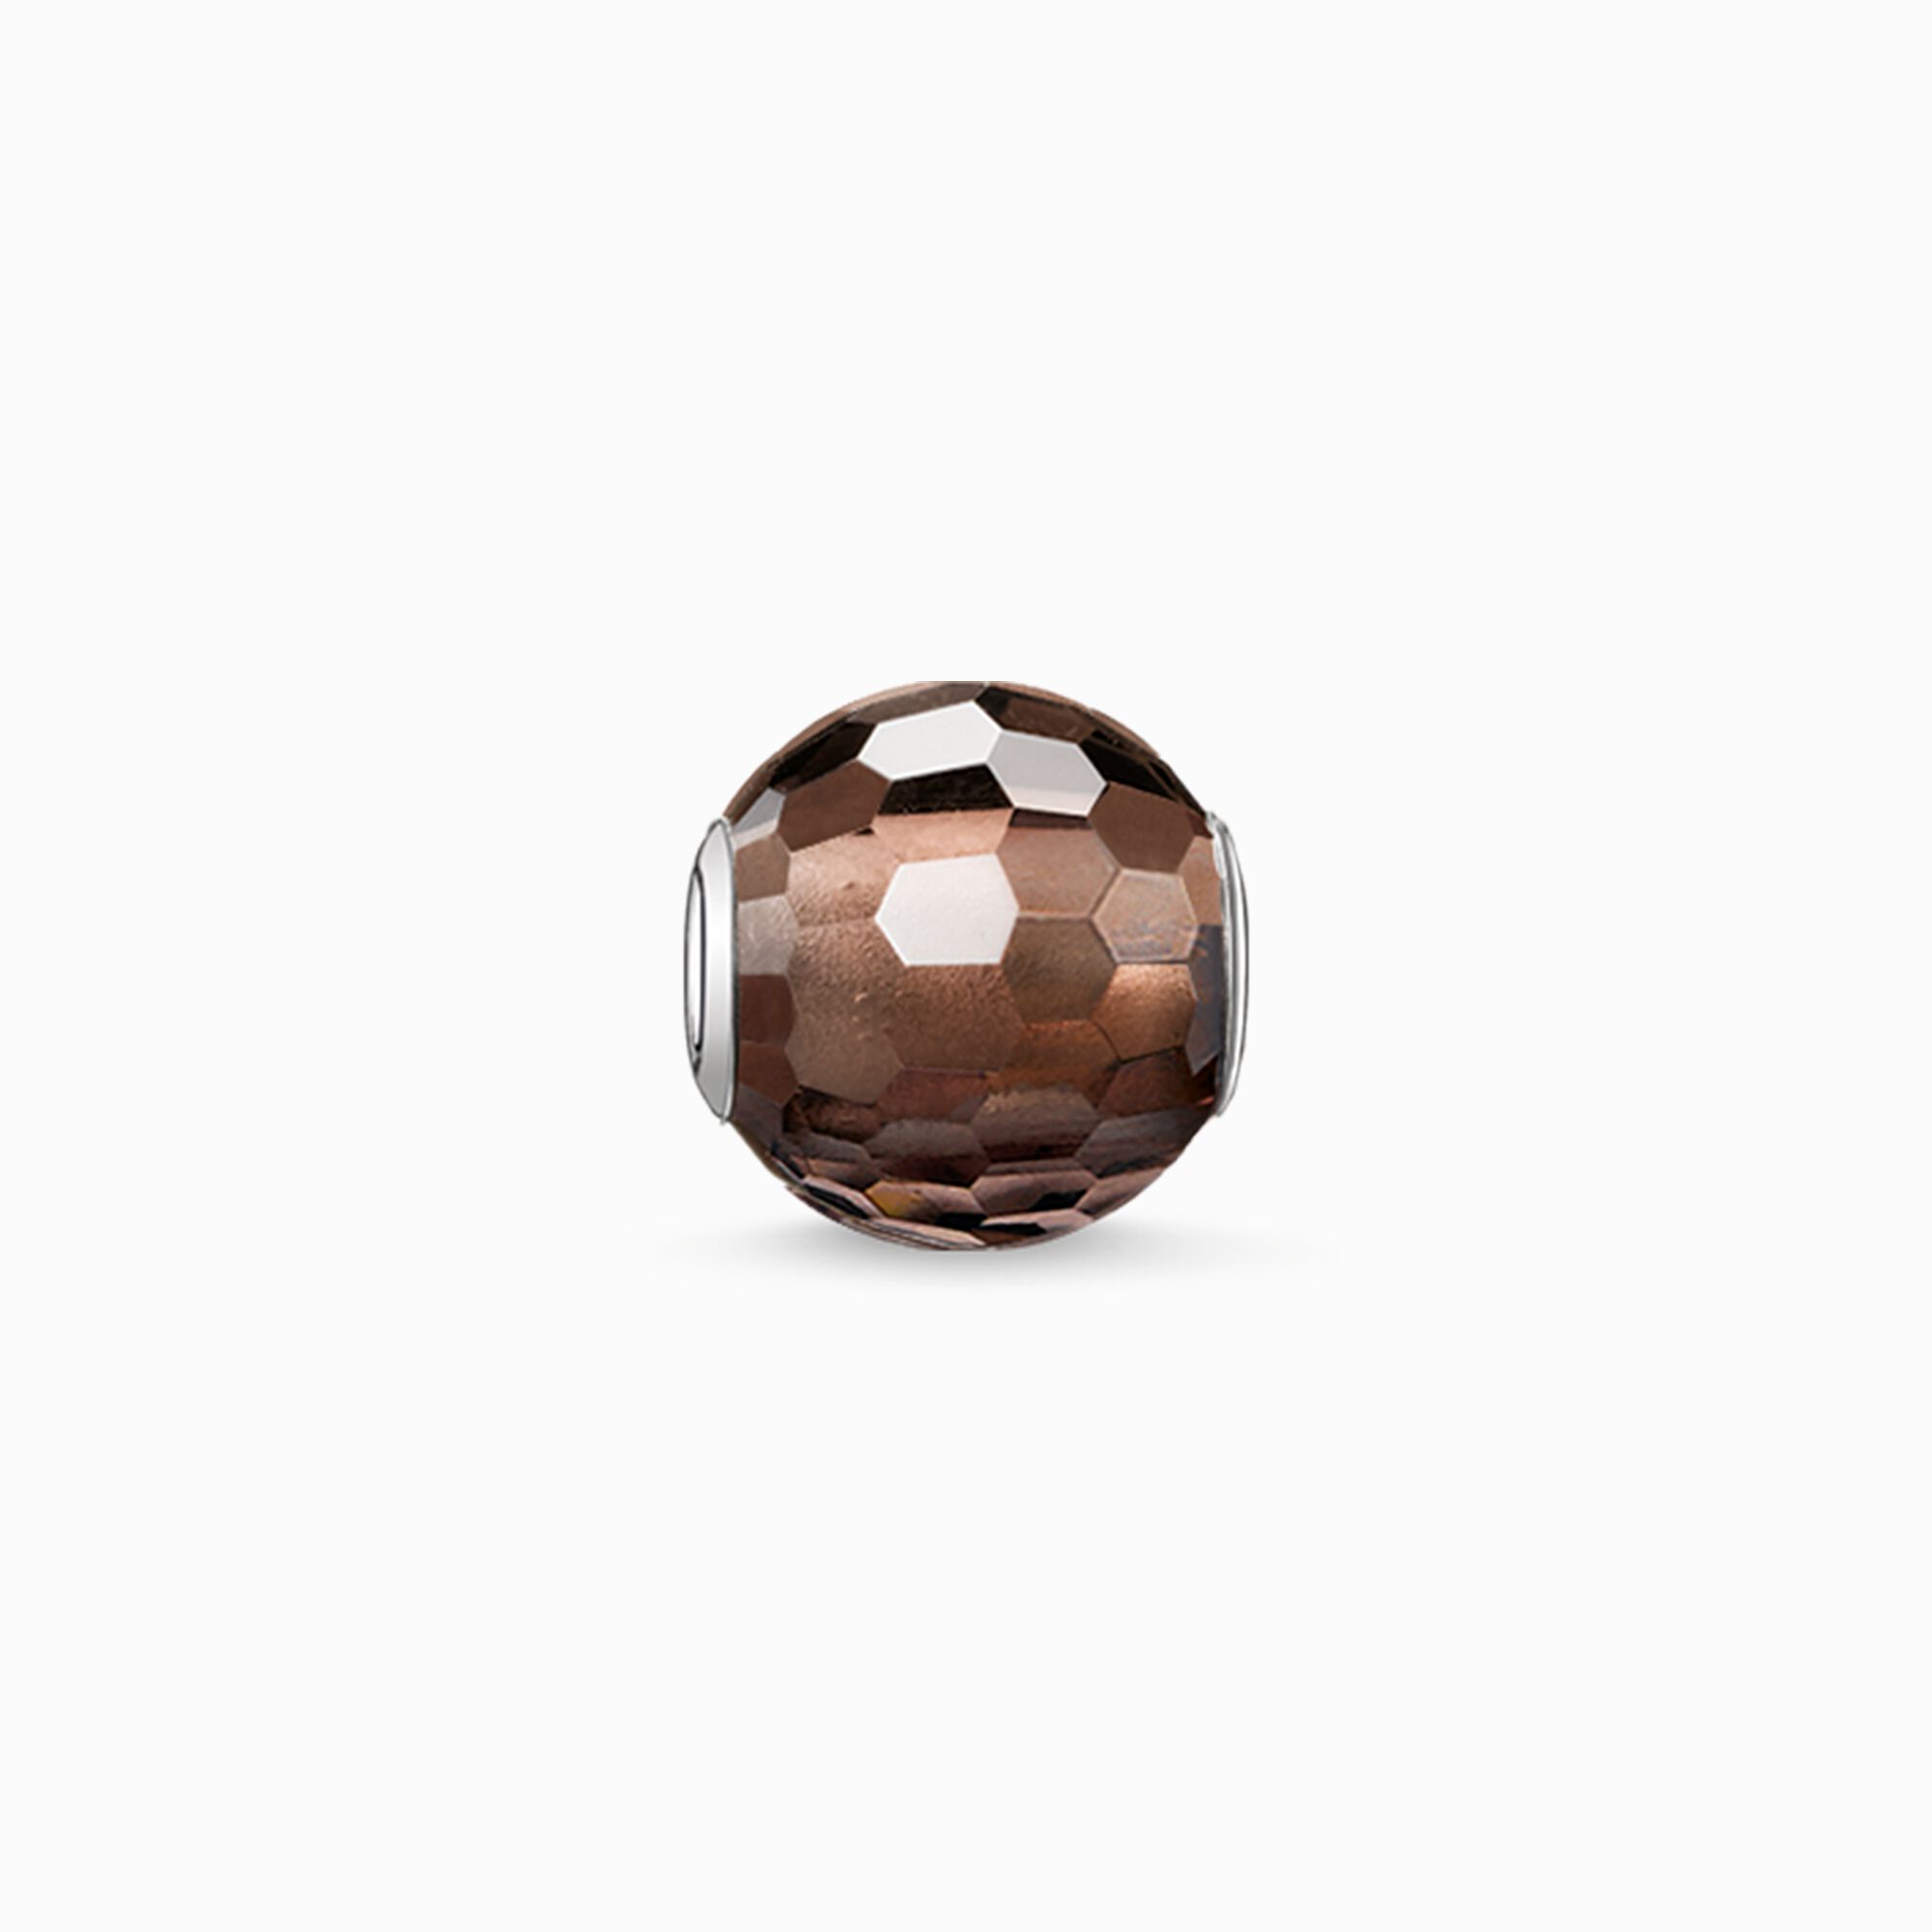 Bead smoky quartz from the Karma Beads collection in the THOMAS SABO online store